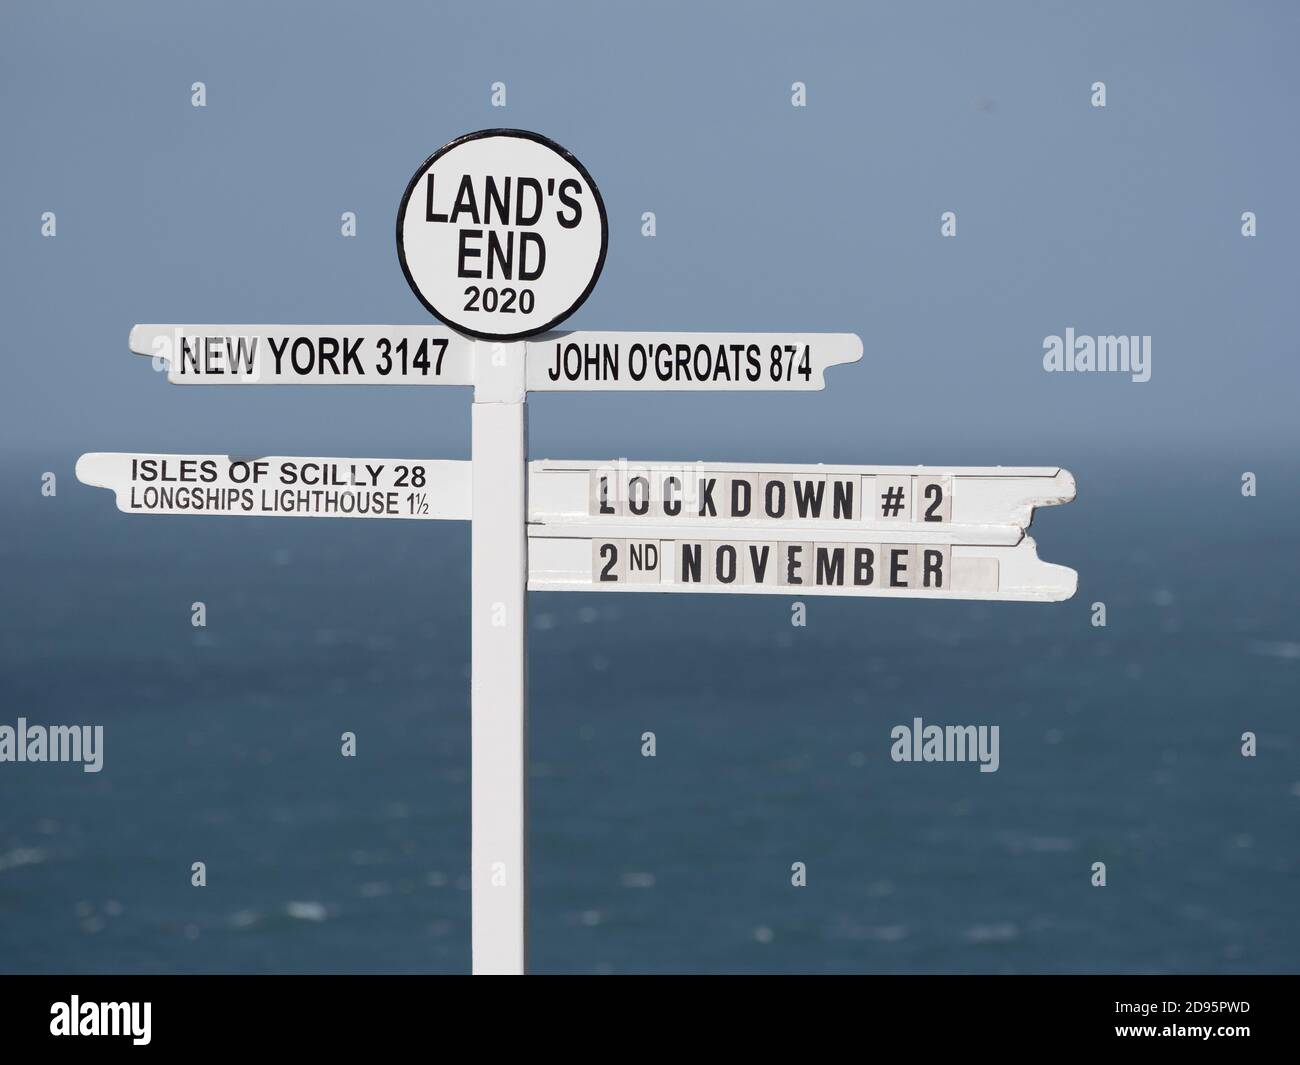 Iconic signpost at Land's End in UK has 'Lockdown#2' written on it indicating current affairs in UK Coronavirus epidemic rest Stock Photo